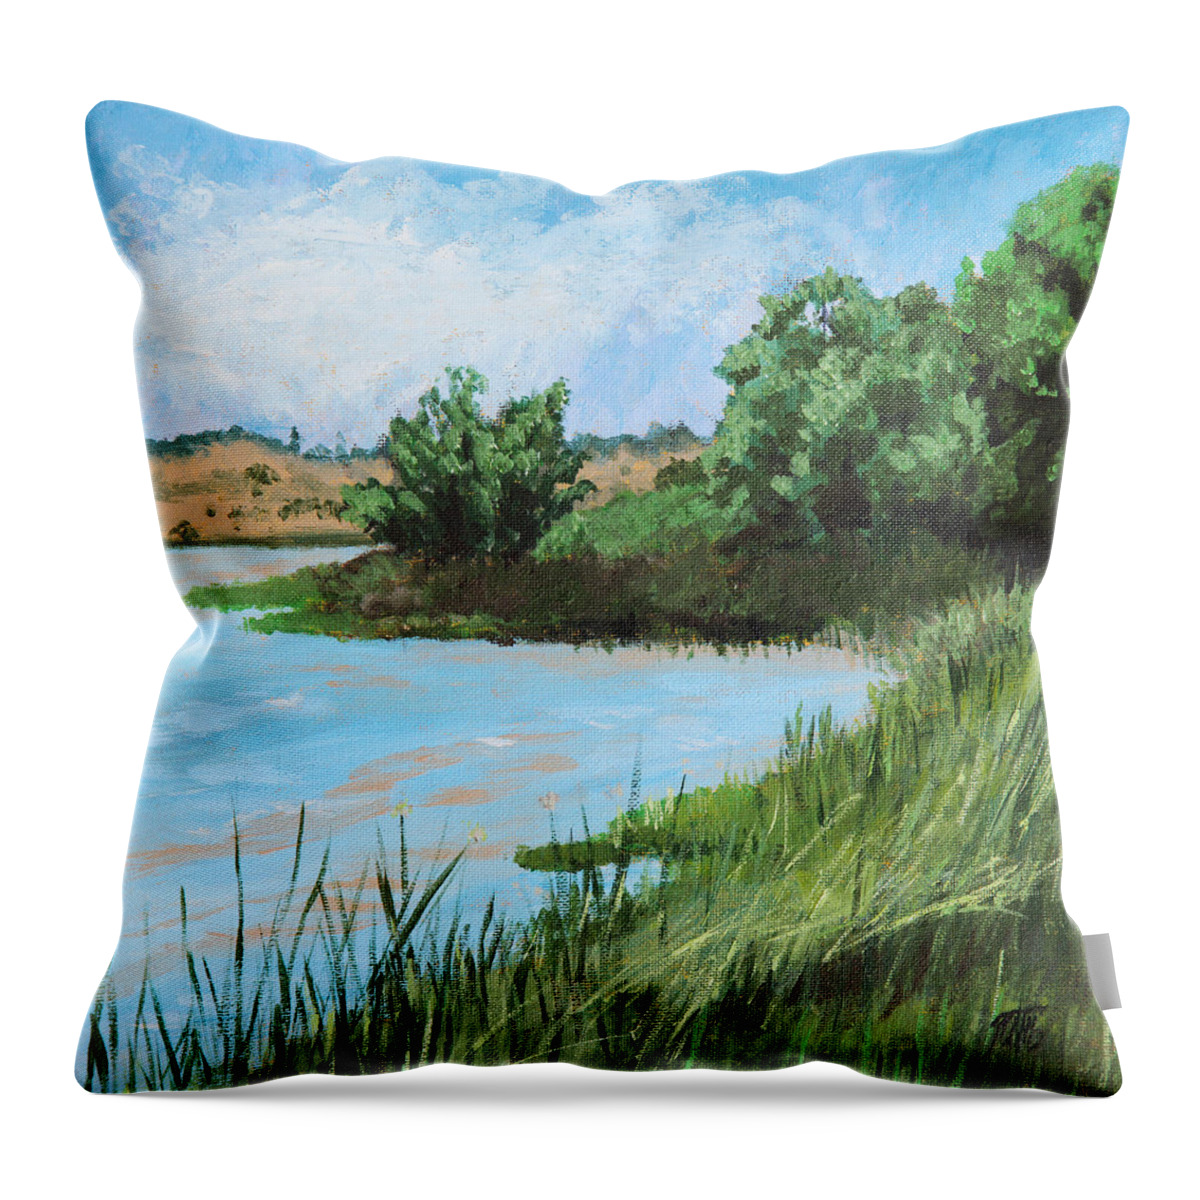 Grass Throw Pillow featuring the painting Grassy Shore by Masha Batkova